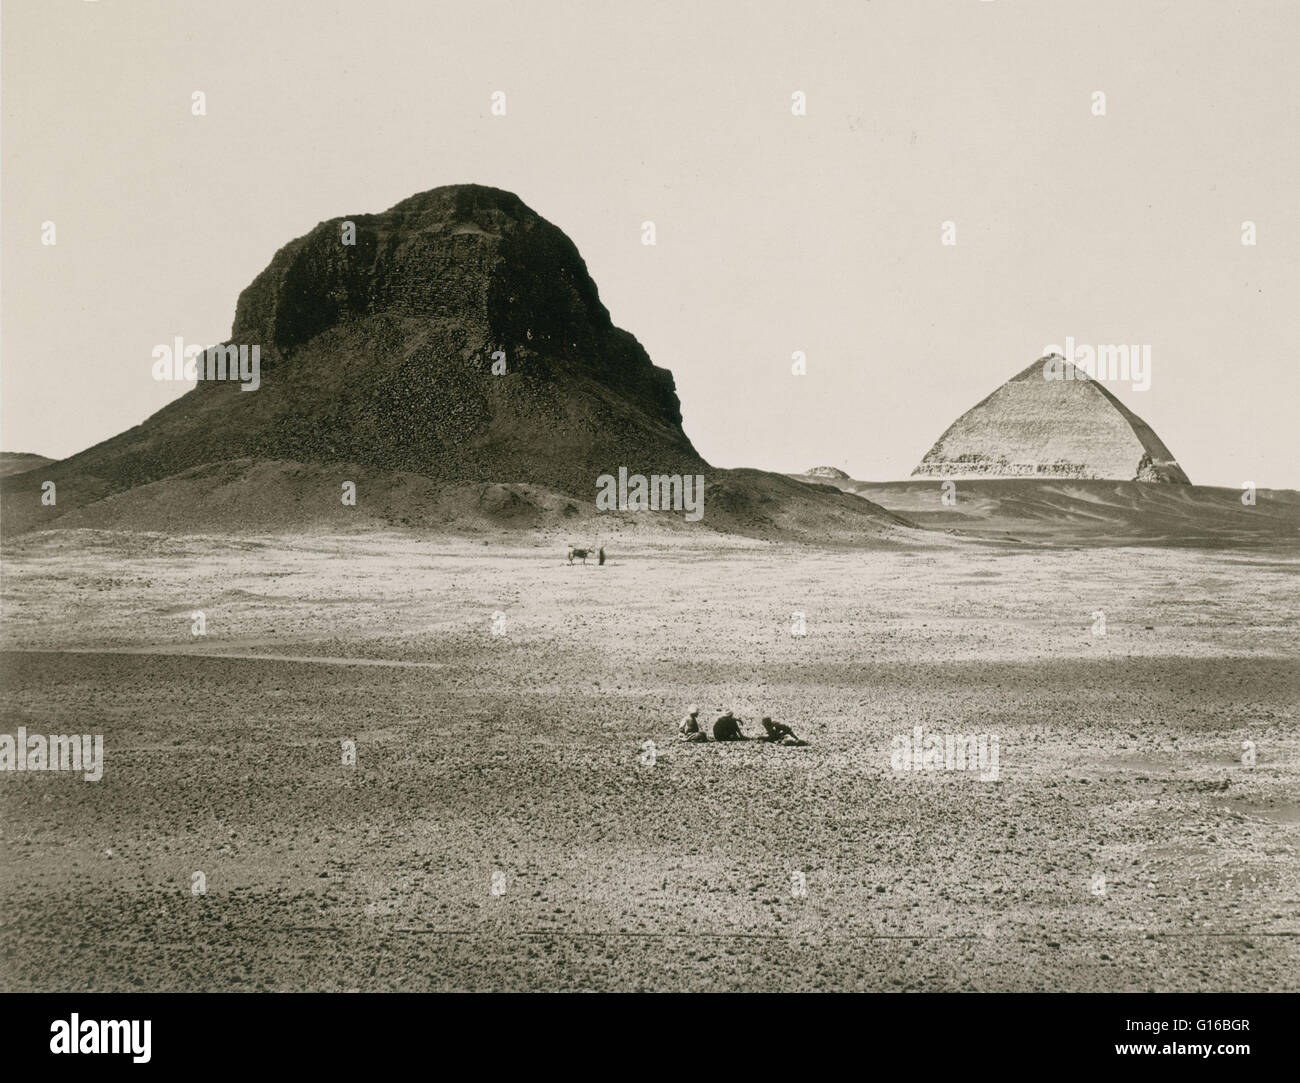 Caption: 'Pyramids of Dahshoor, From the East, 1857, photographed by Francis Firth.' The Bent Pyramid is an ancient Egyptian pyramid located at the royal necropolis of Dahshur, built under the Old Kingdom Pharaoh Sneferu (circa 2600 BC). A unique example Stock Photo